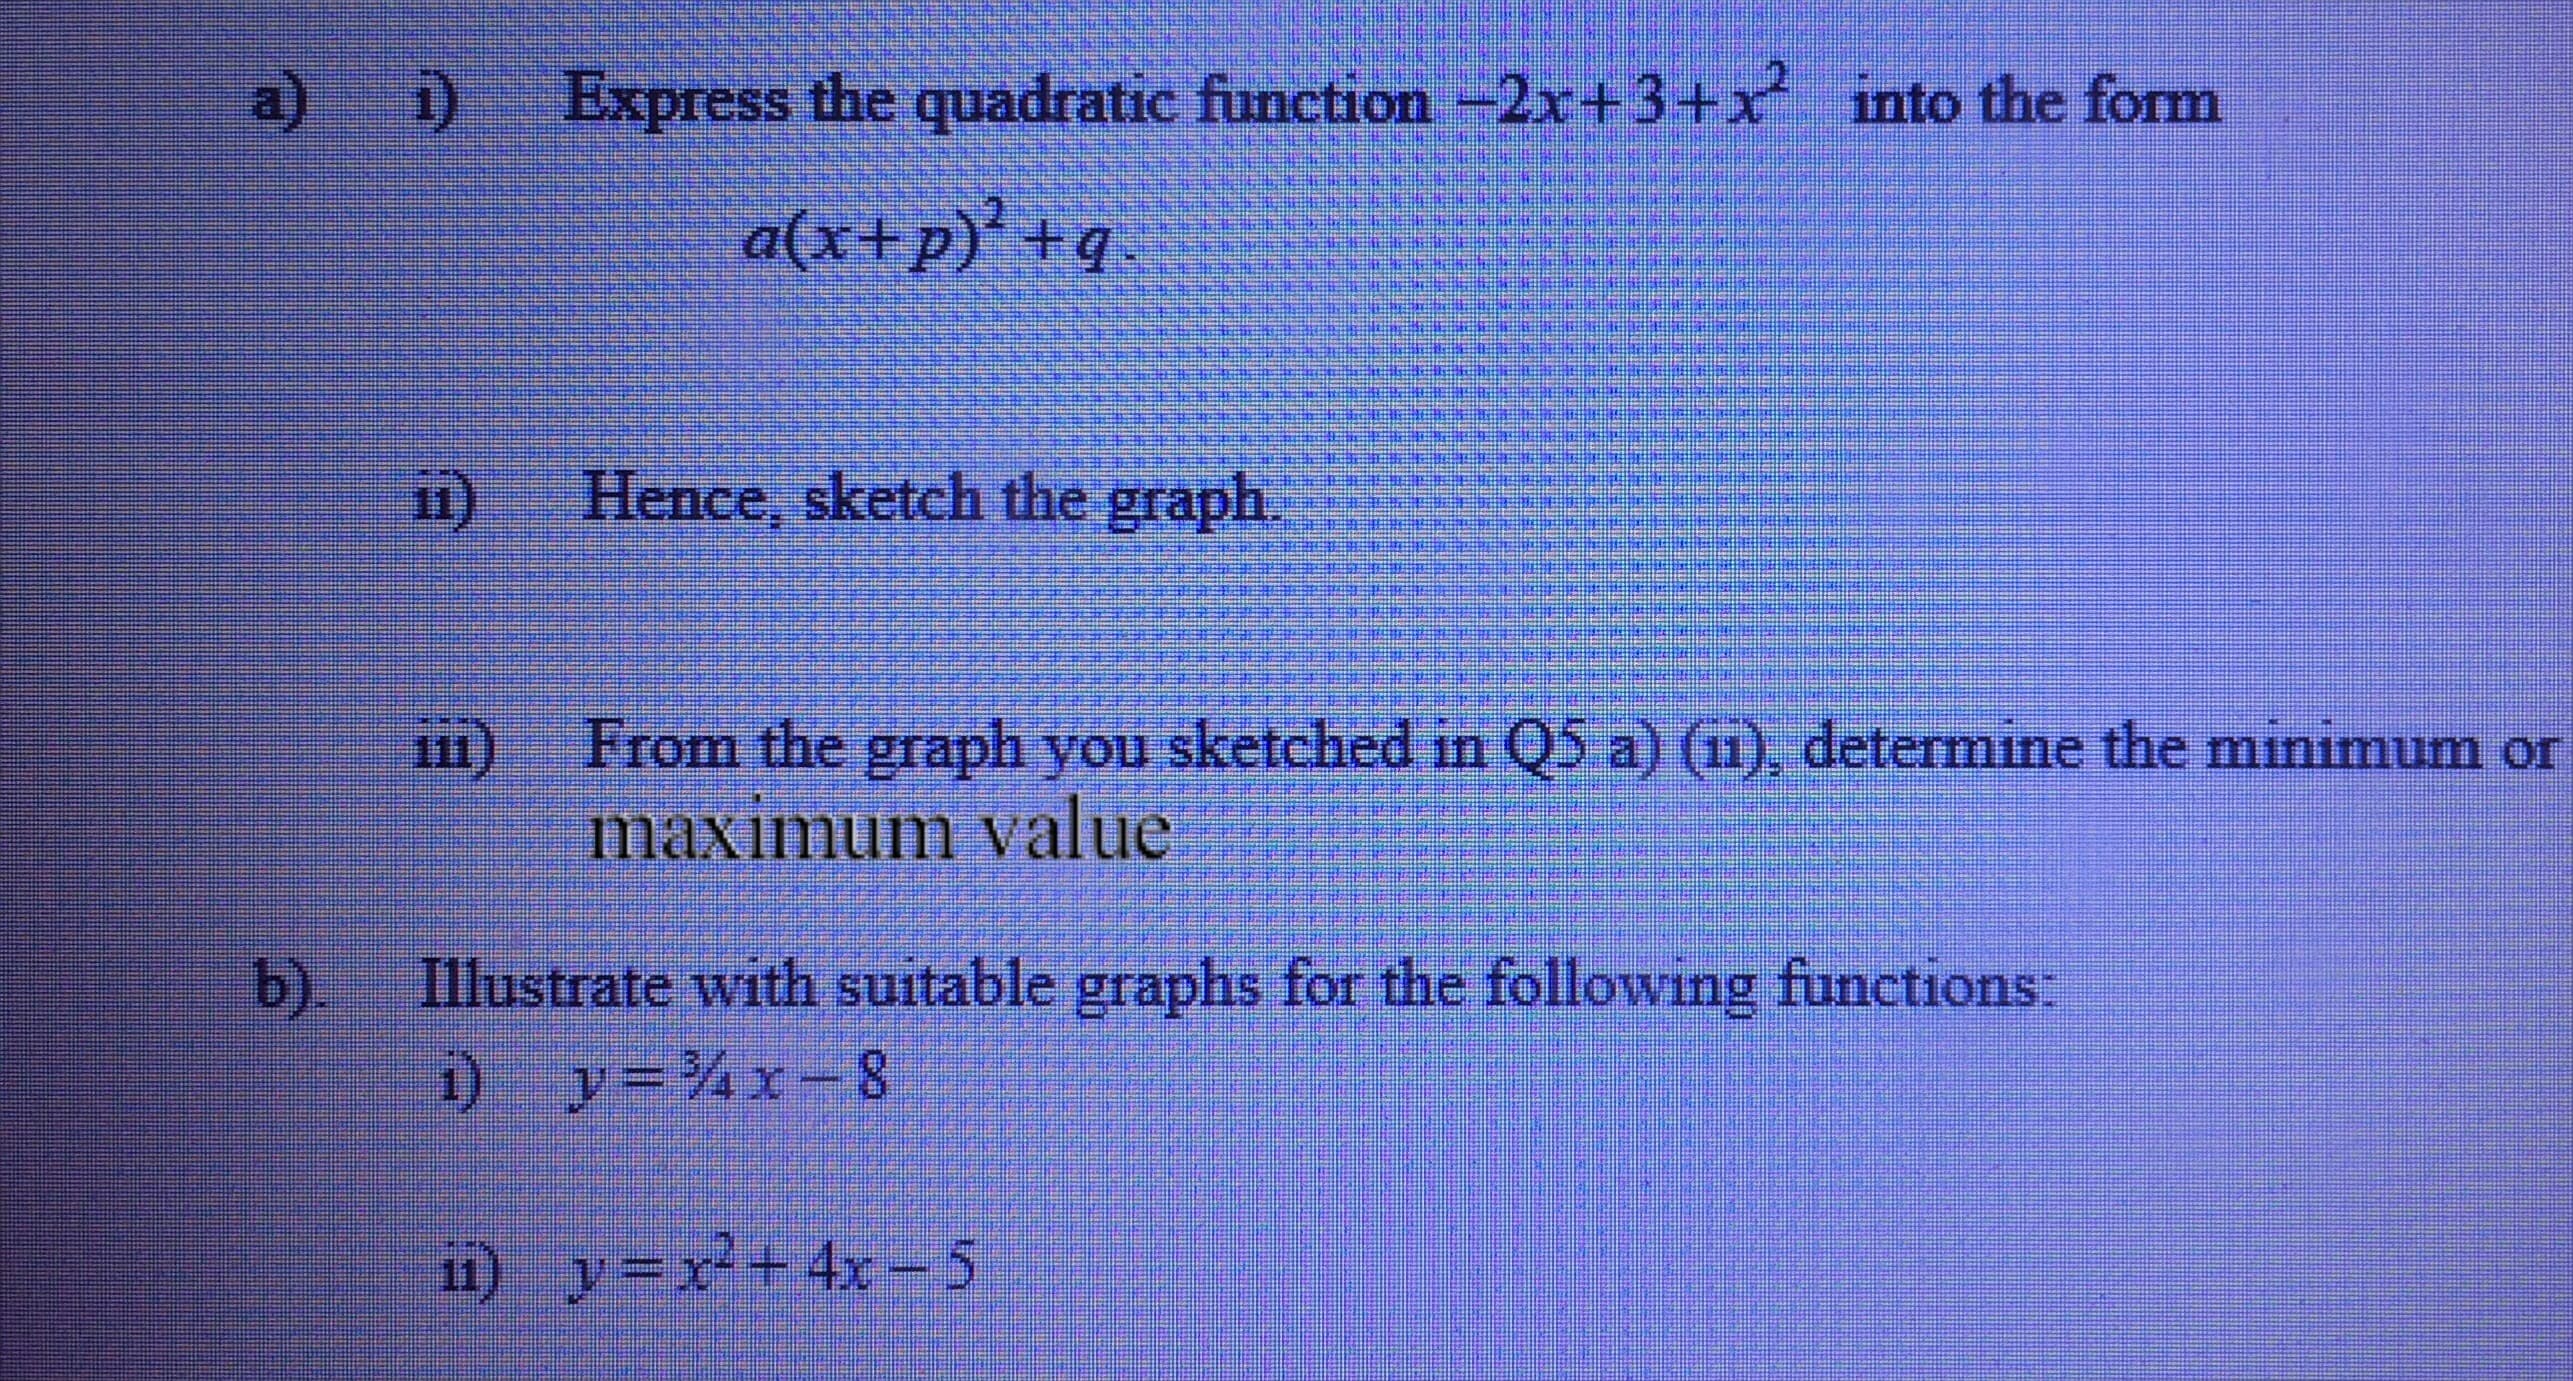 Express the quadratic function -2x+3+x into the form
a(x+p)' +q
